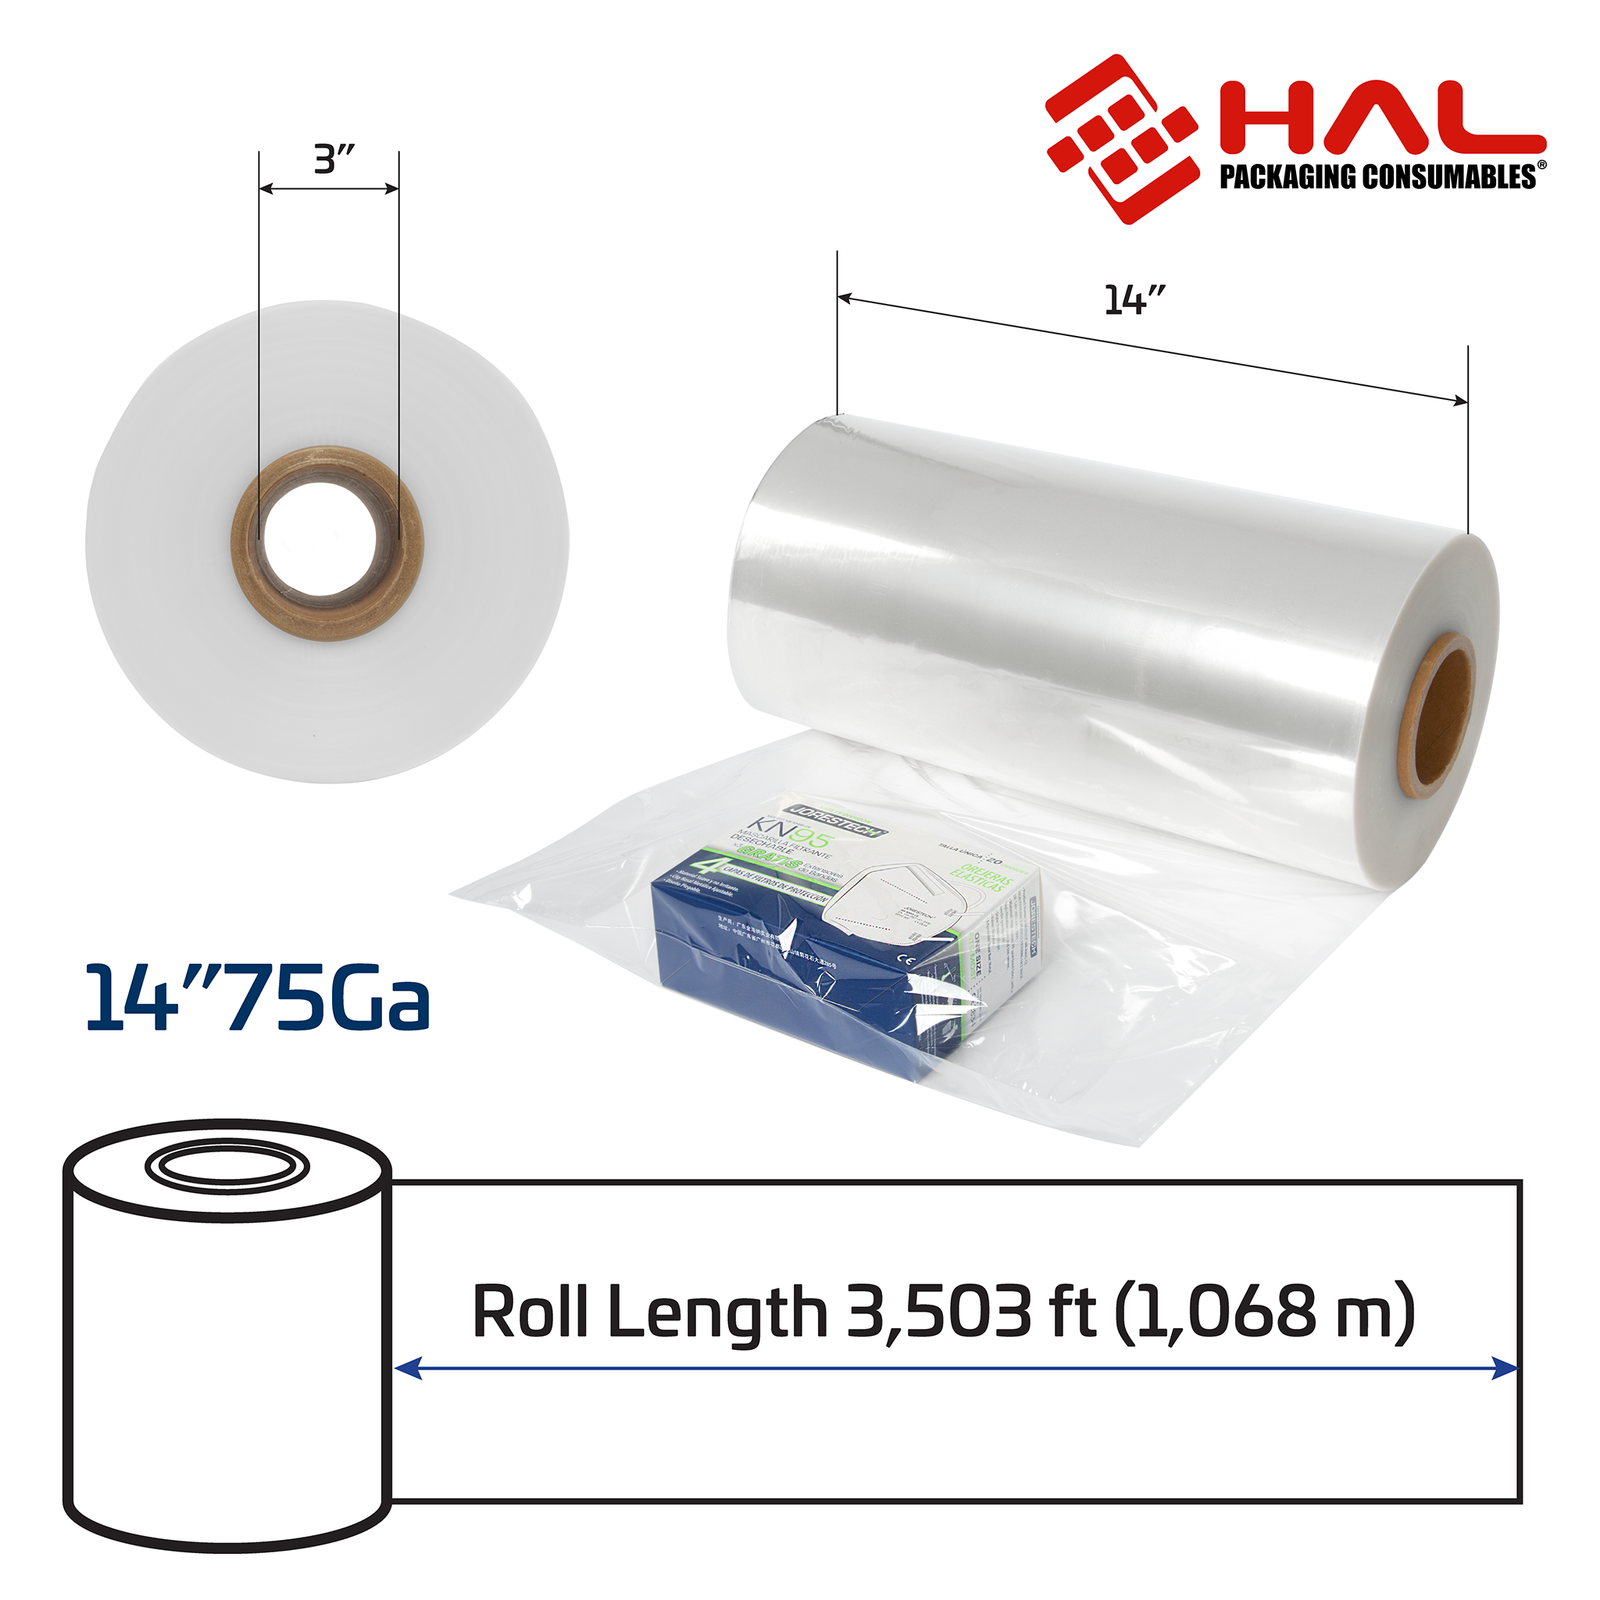 Measurements of the 75 gauge shrink wrapping film tube. 3 inch diameter of the inner core, and 14 inch width with a 3,503 ft. length (1,068 meters).